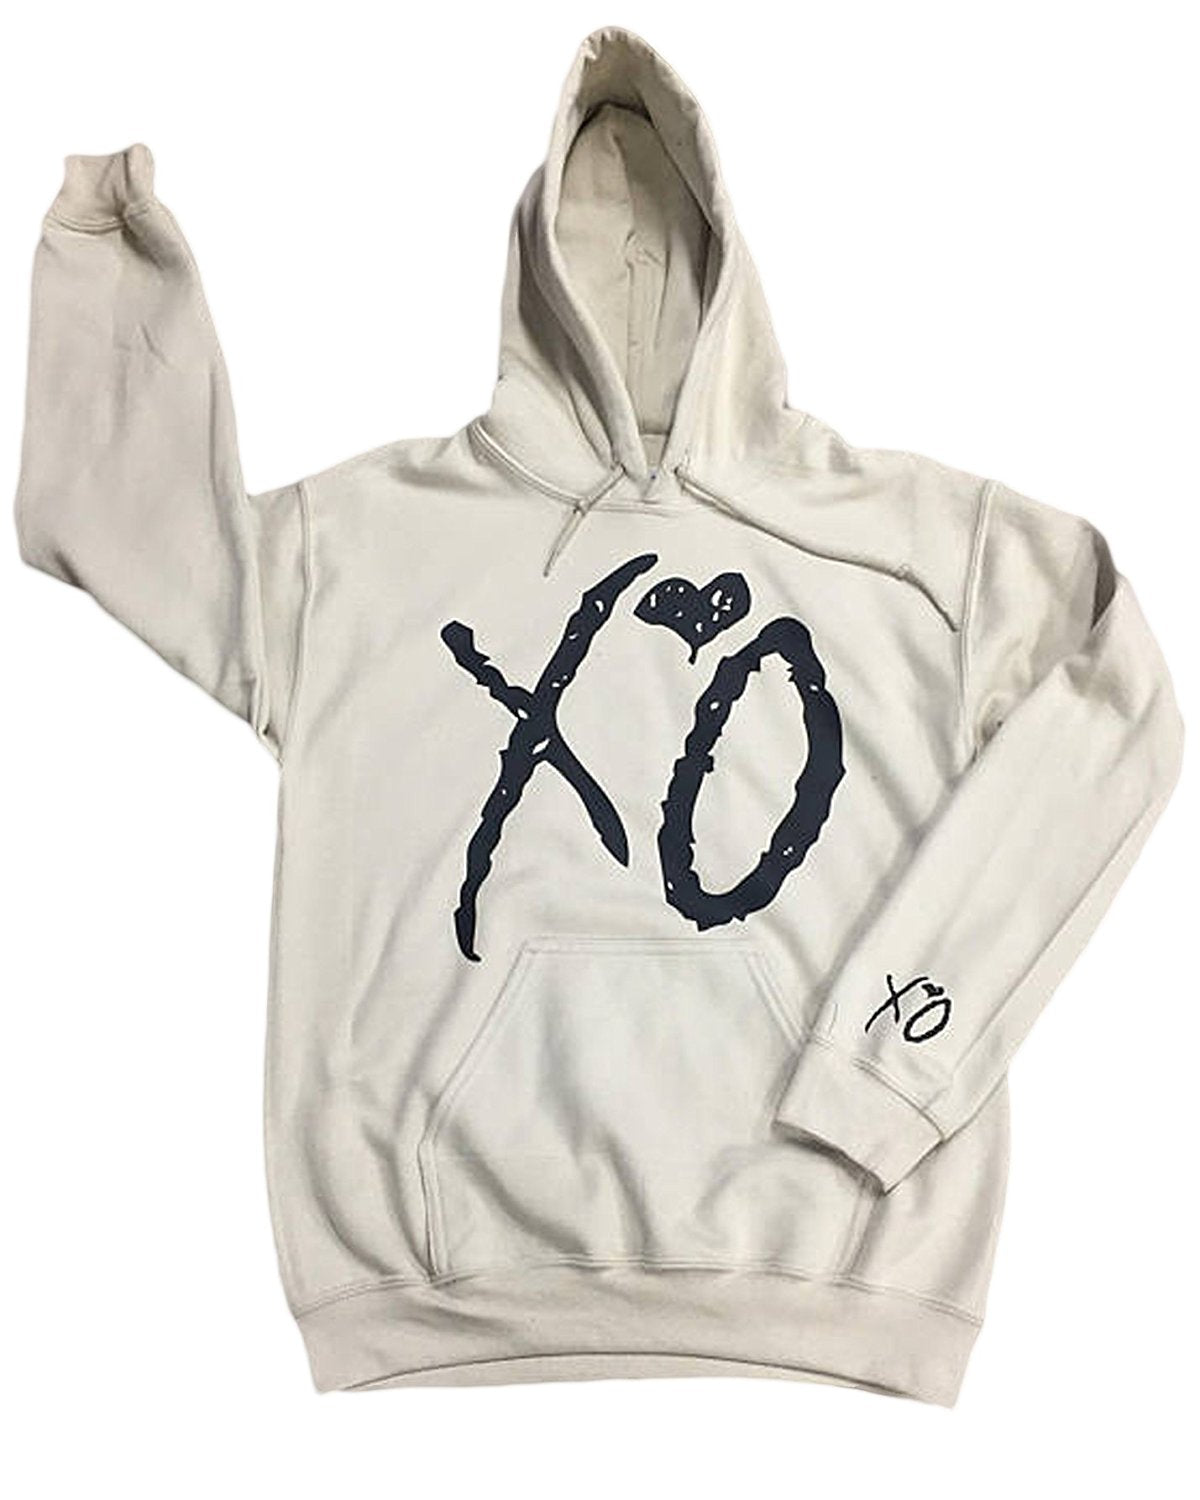 Inspired The Weeknd Zip Up XO Rhinestone Hoodie XO Front Only